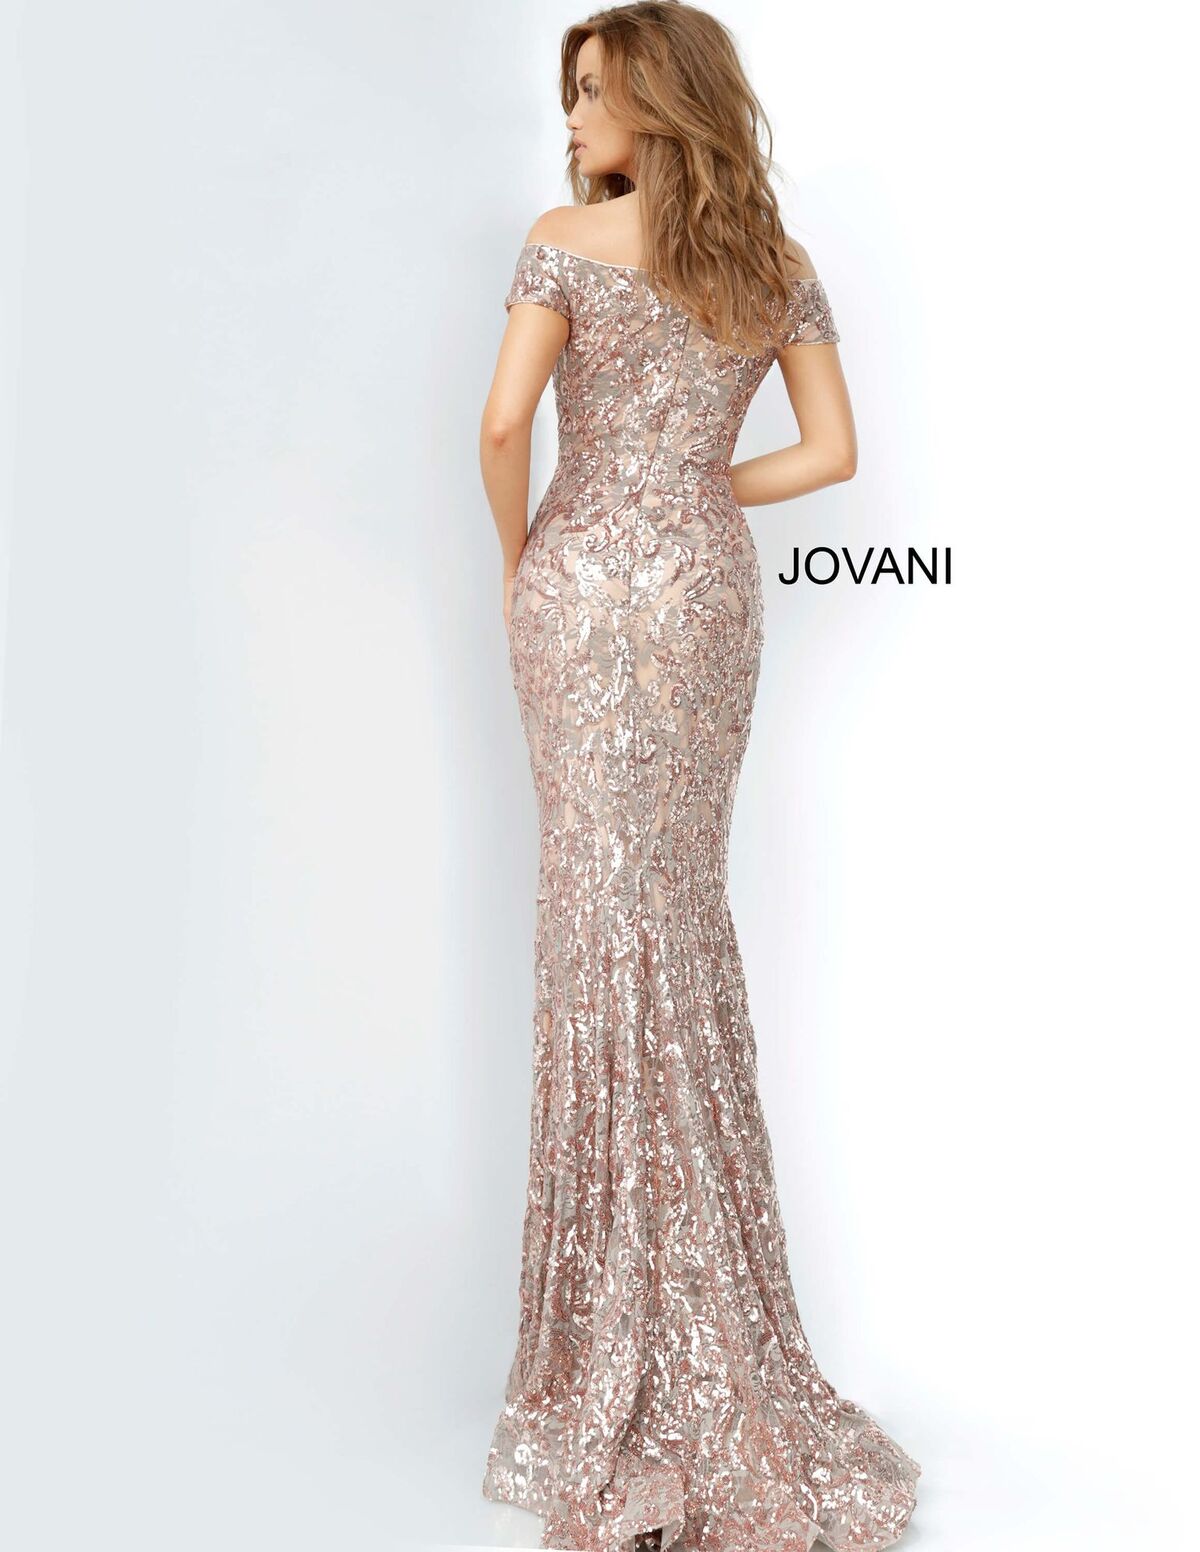 Jovani 1122 off the shoulder fitted mermaid sequin prom dress evening gown pageant dress   Available colors:  Copper  Available sizes:  00-24